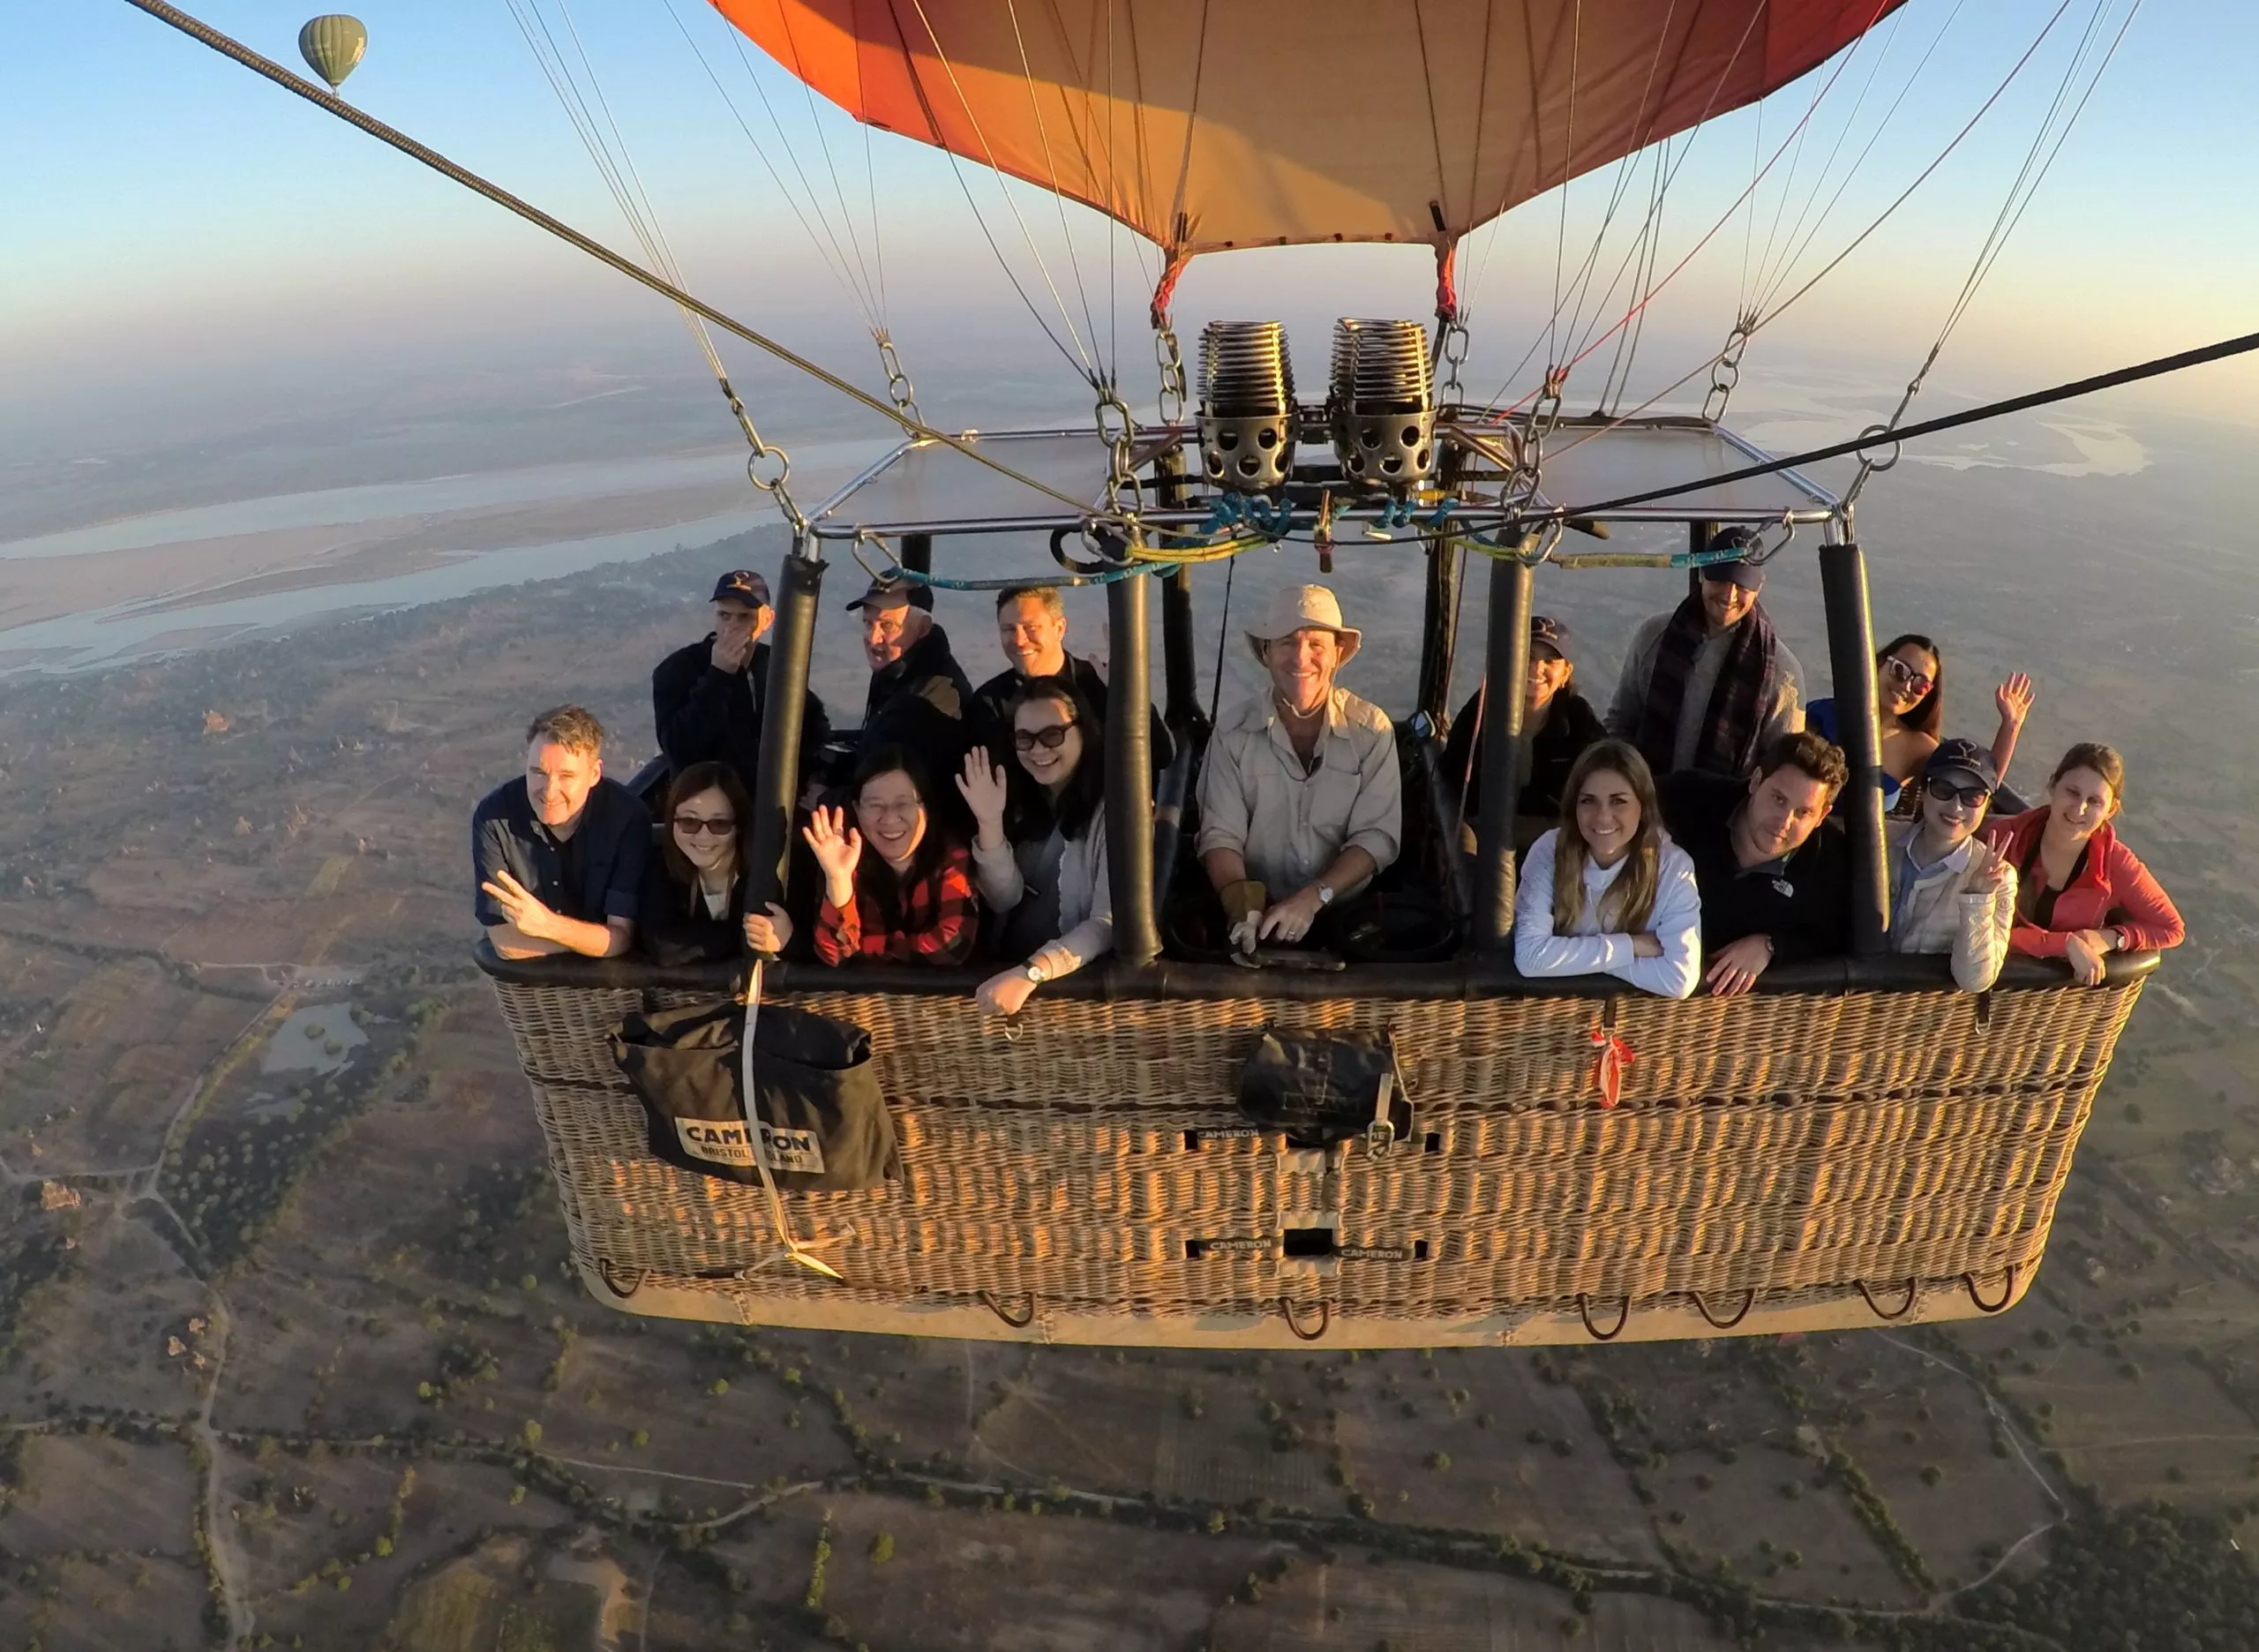 Balloons Over Bagan in Myanmar, Central Asia | Hot Air Ballooning - Rated 10